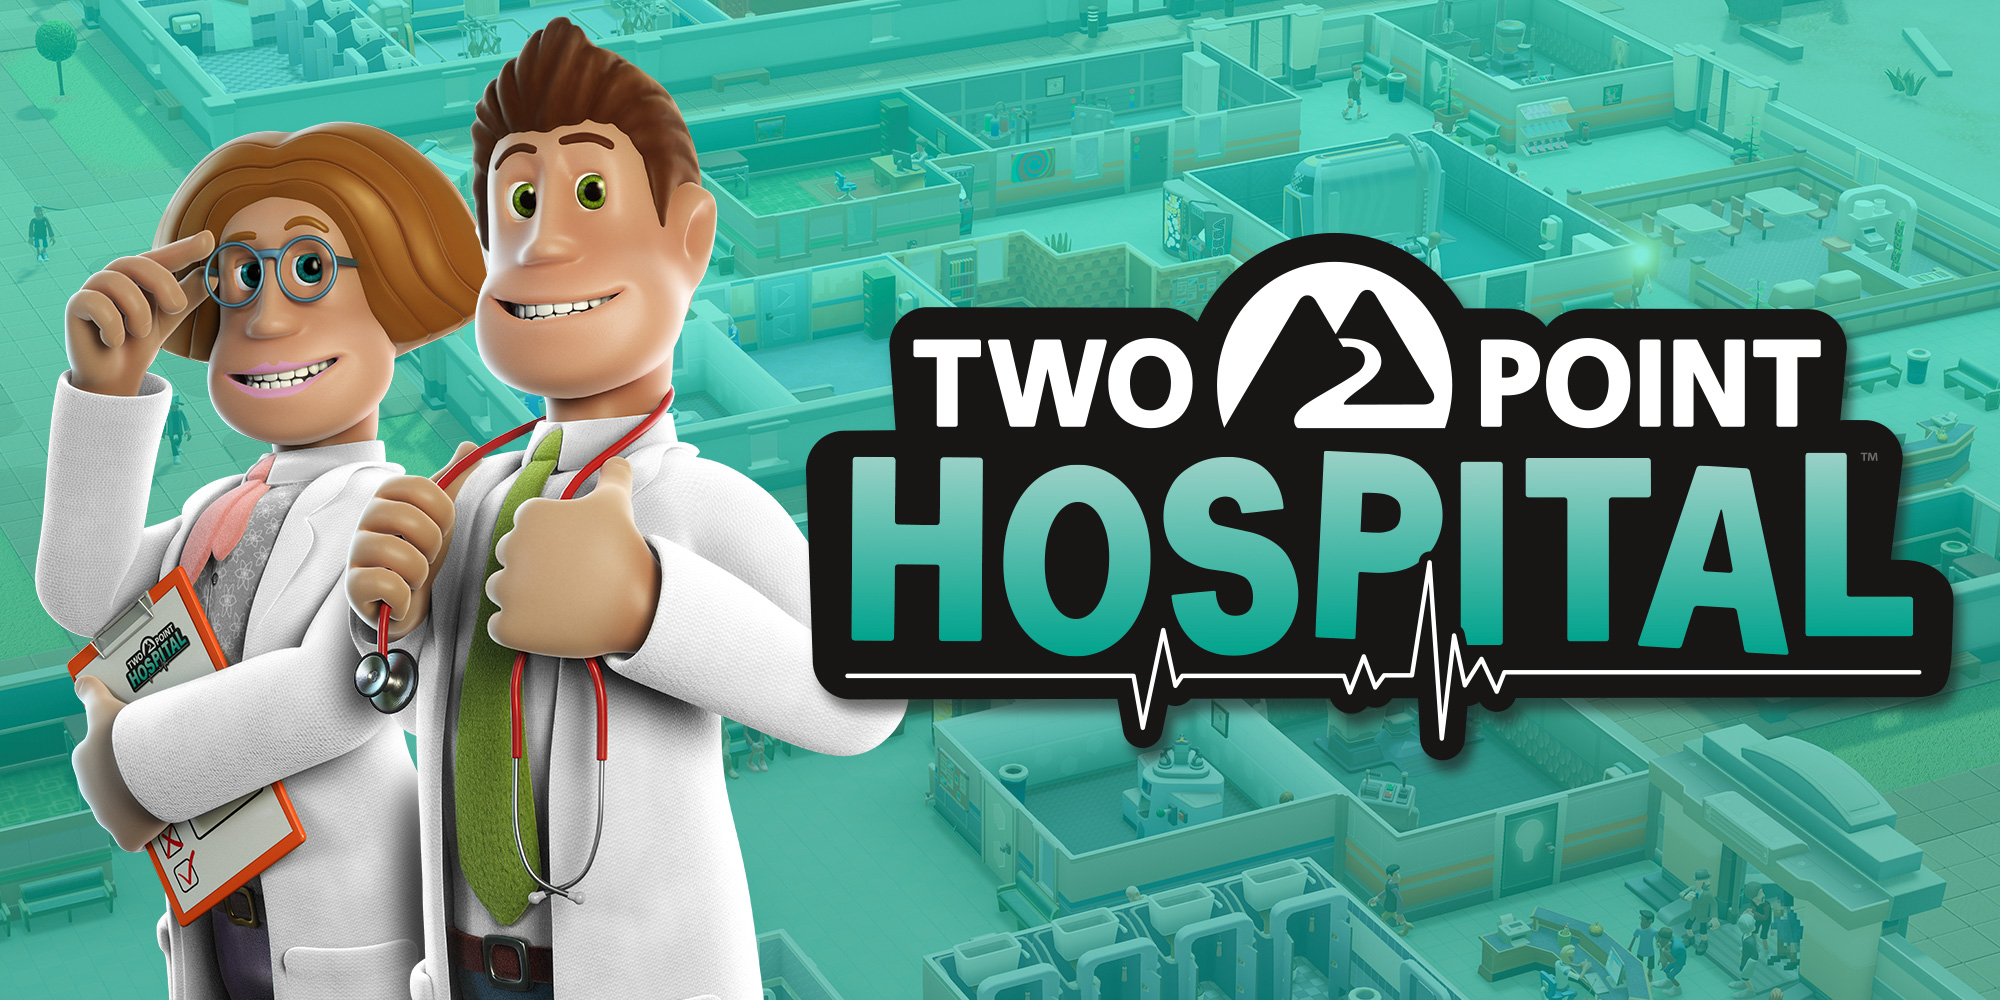 H2x1_NSwitch_TwoPointHospital.jpg